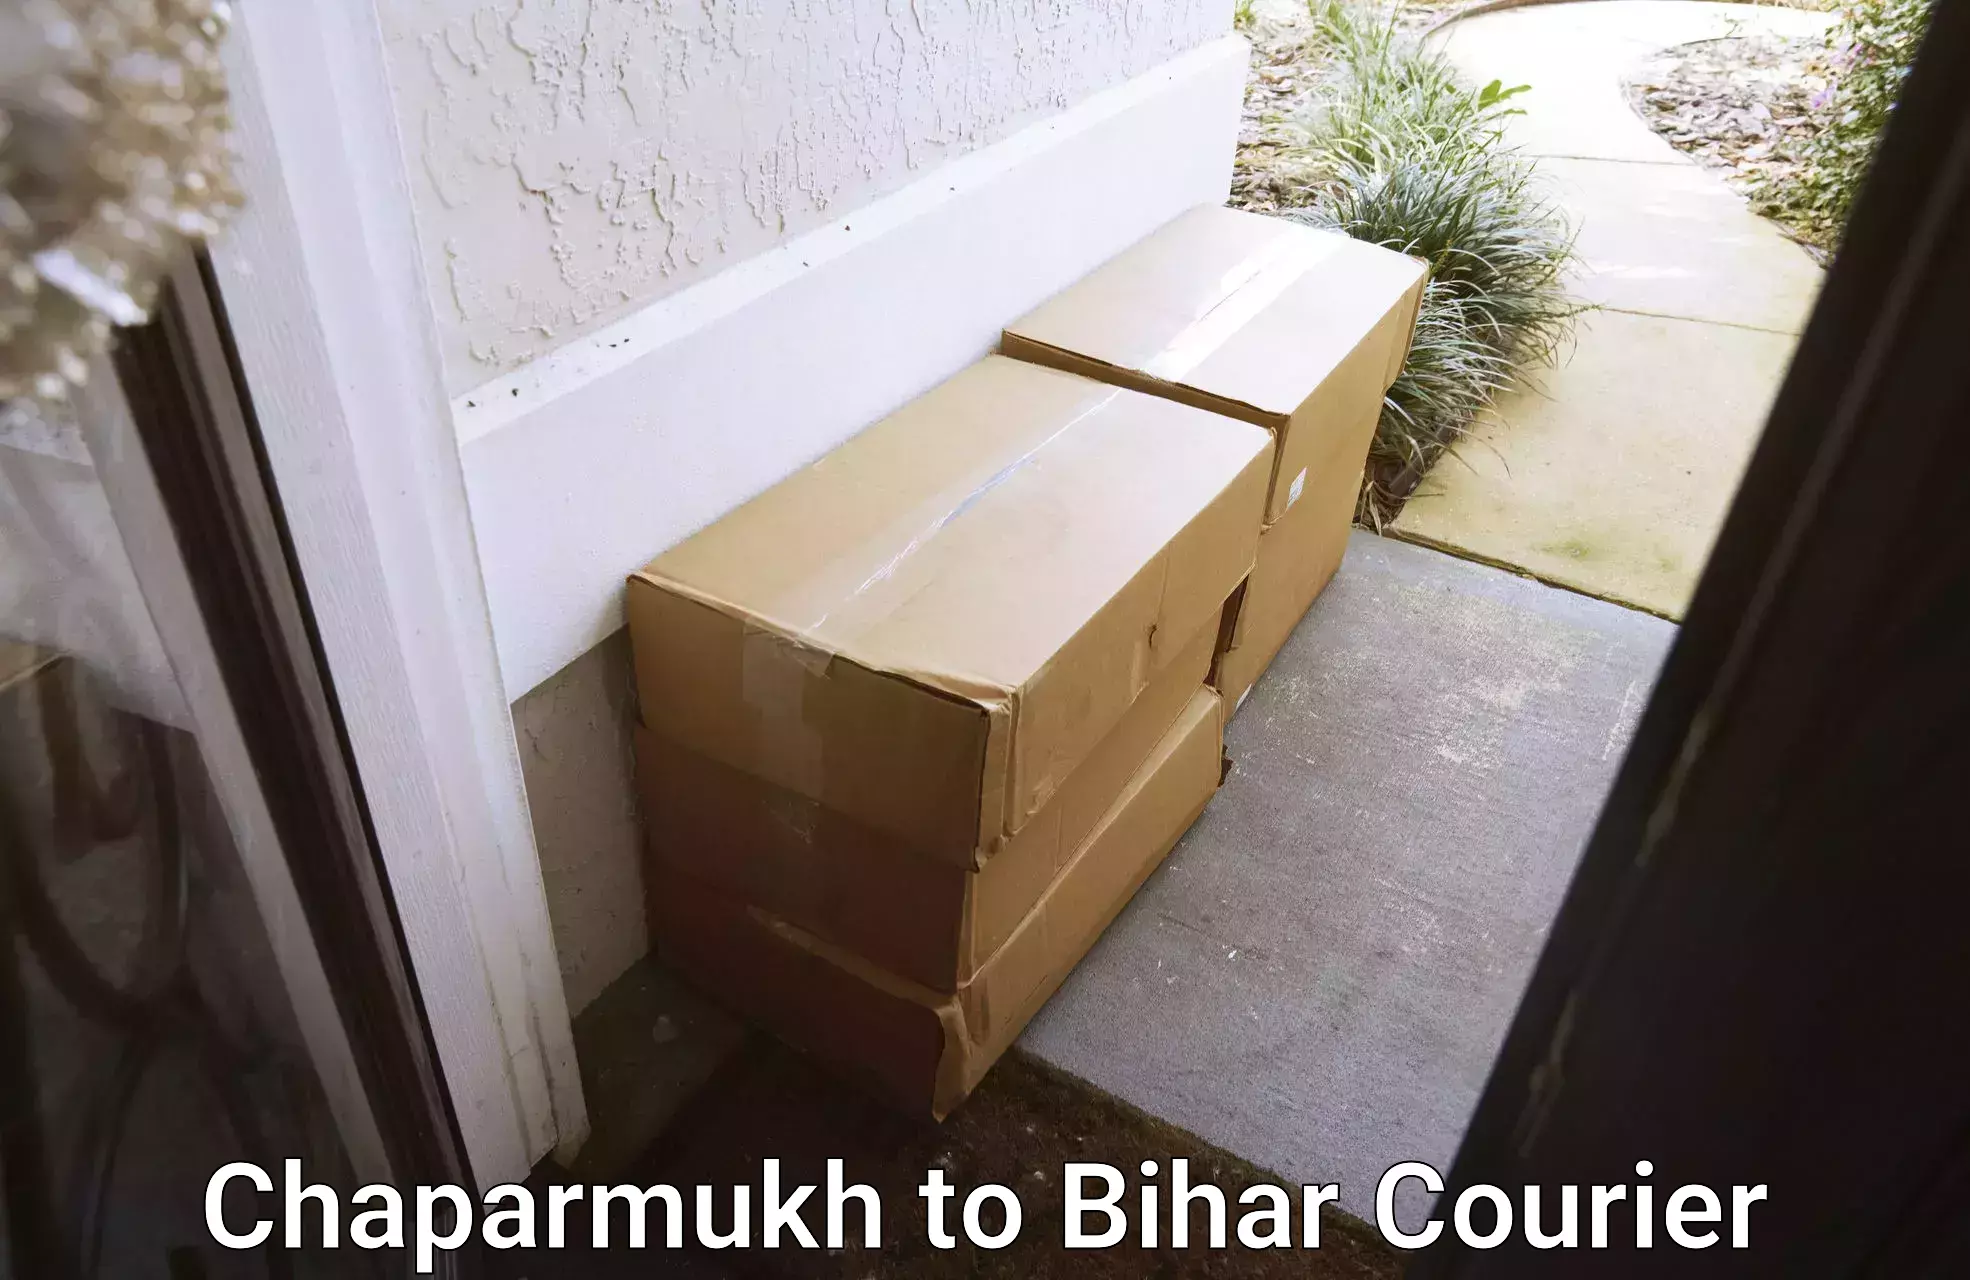 Quality courier services Chaparmukh to Jhanjharpur